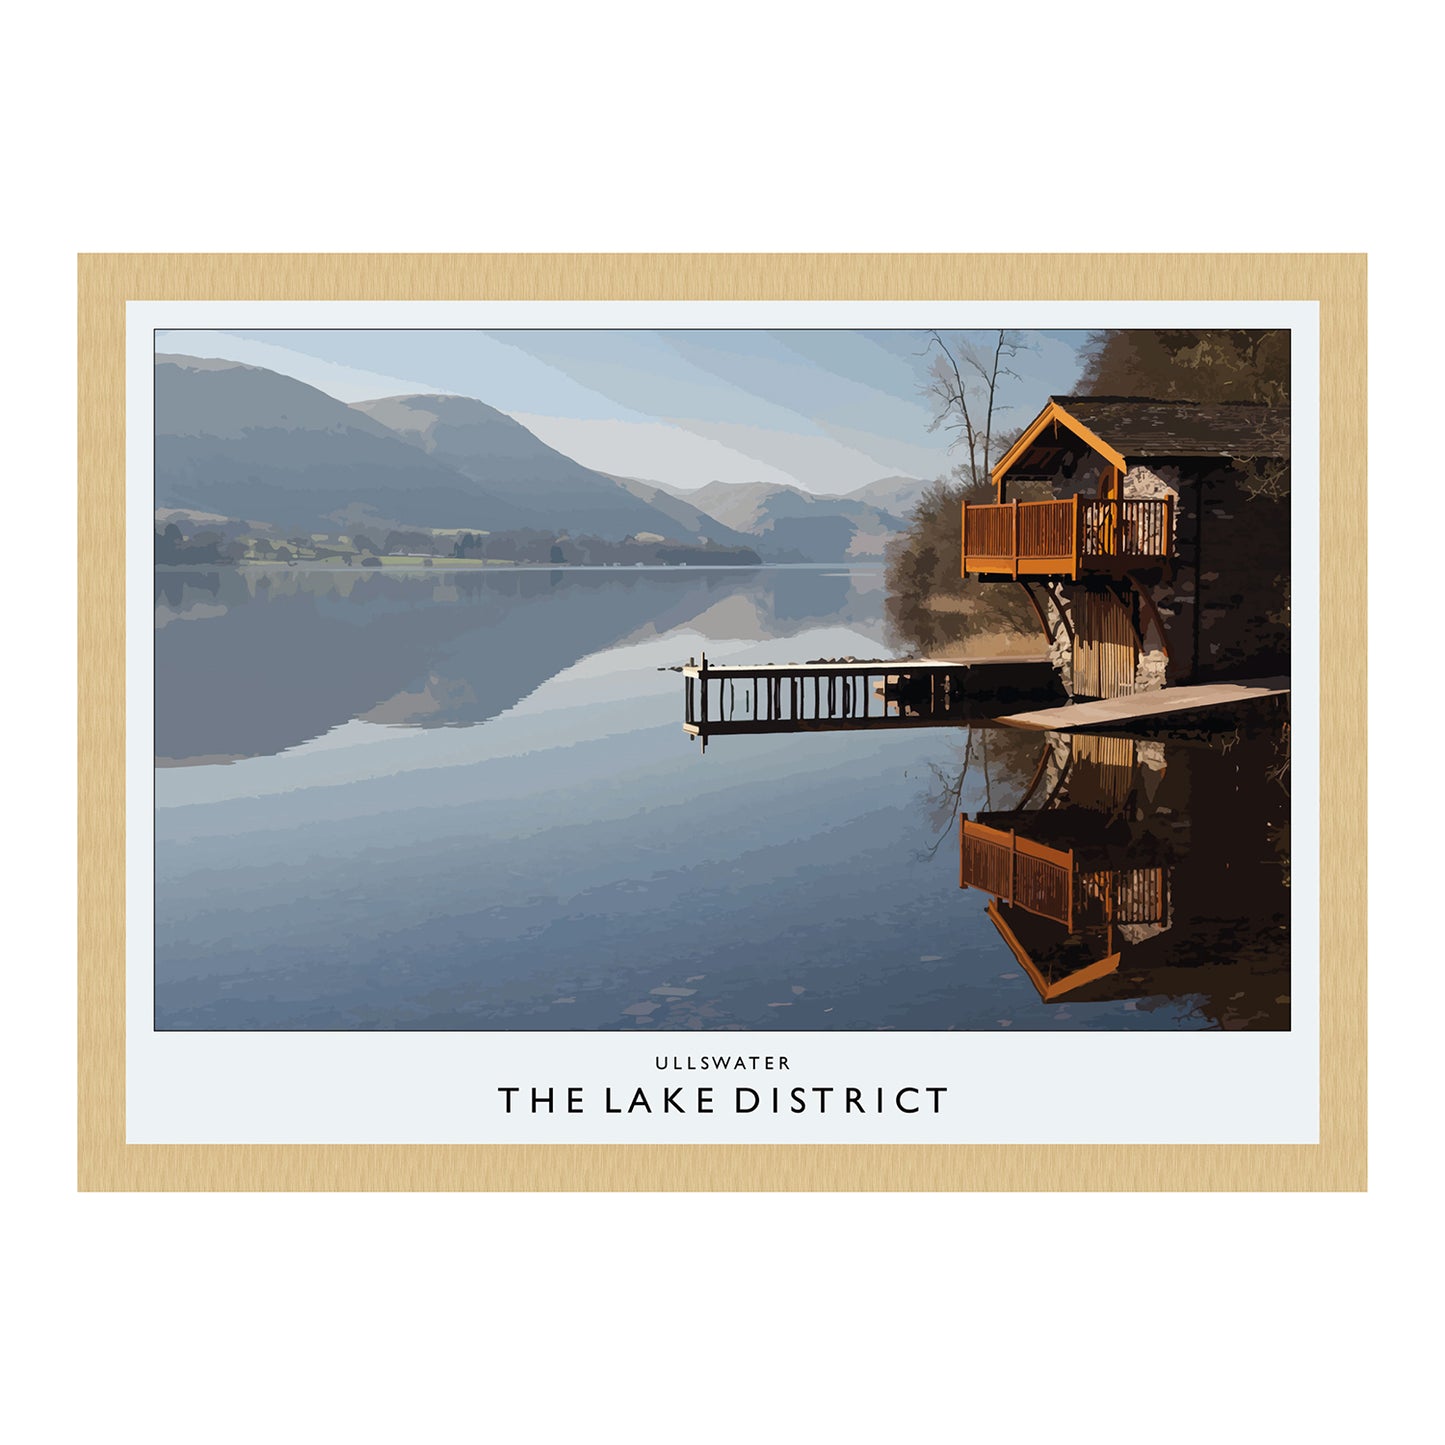 Love the Lakes Ullswater A3 Poster